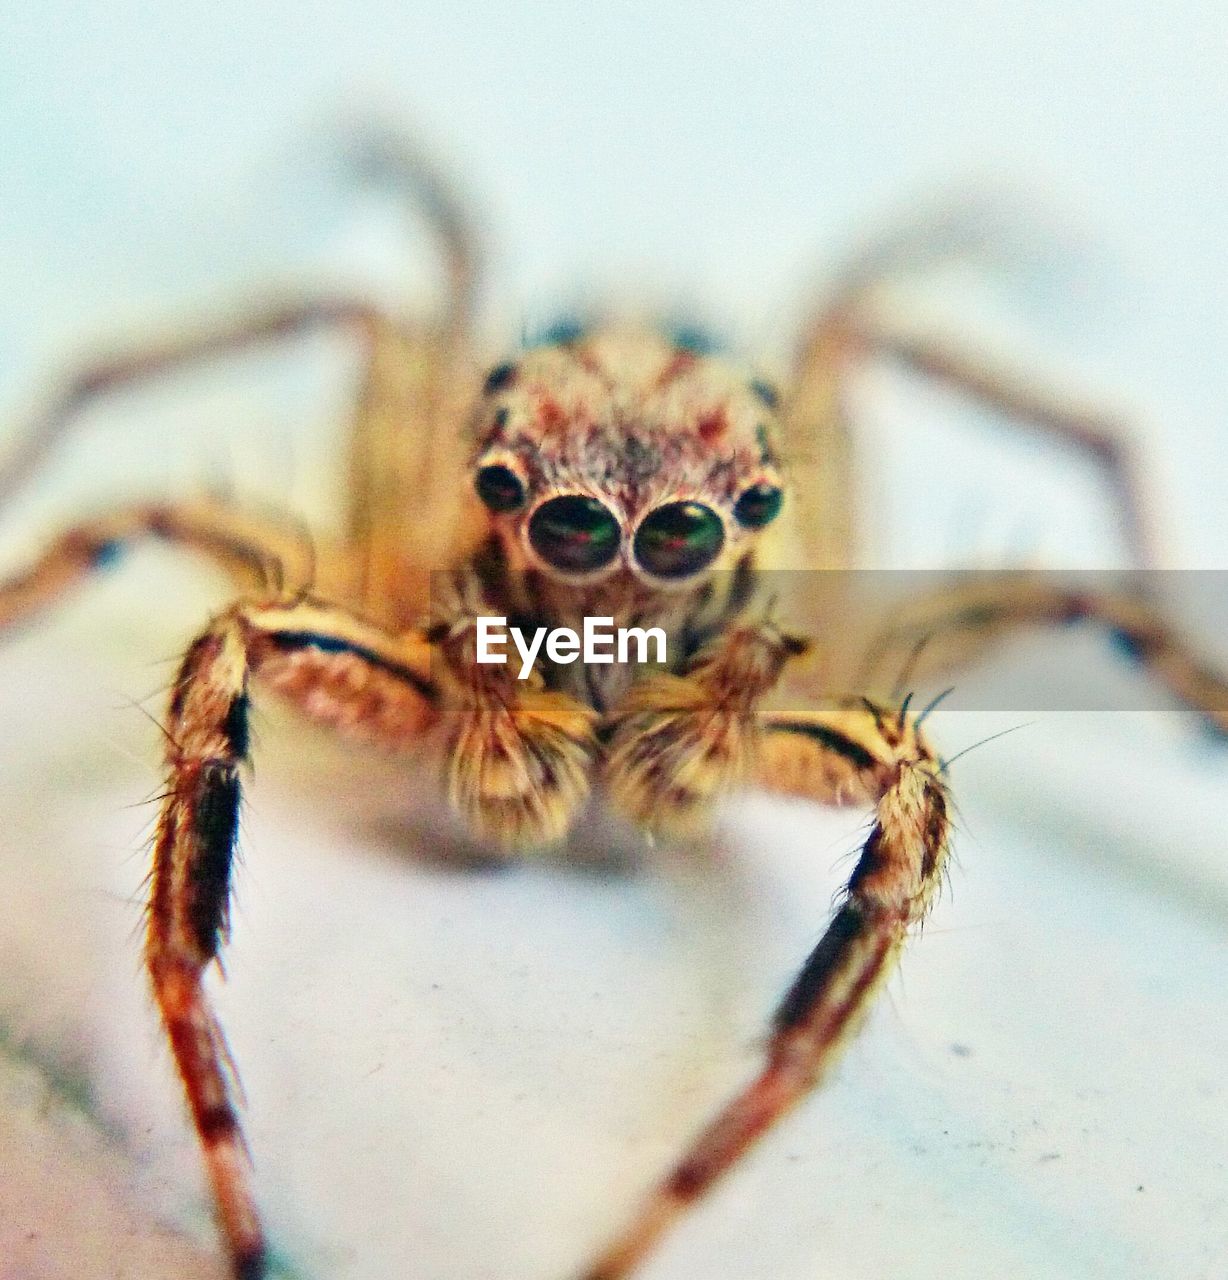 Extreme close-up of spider on table